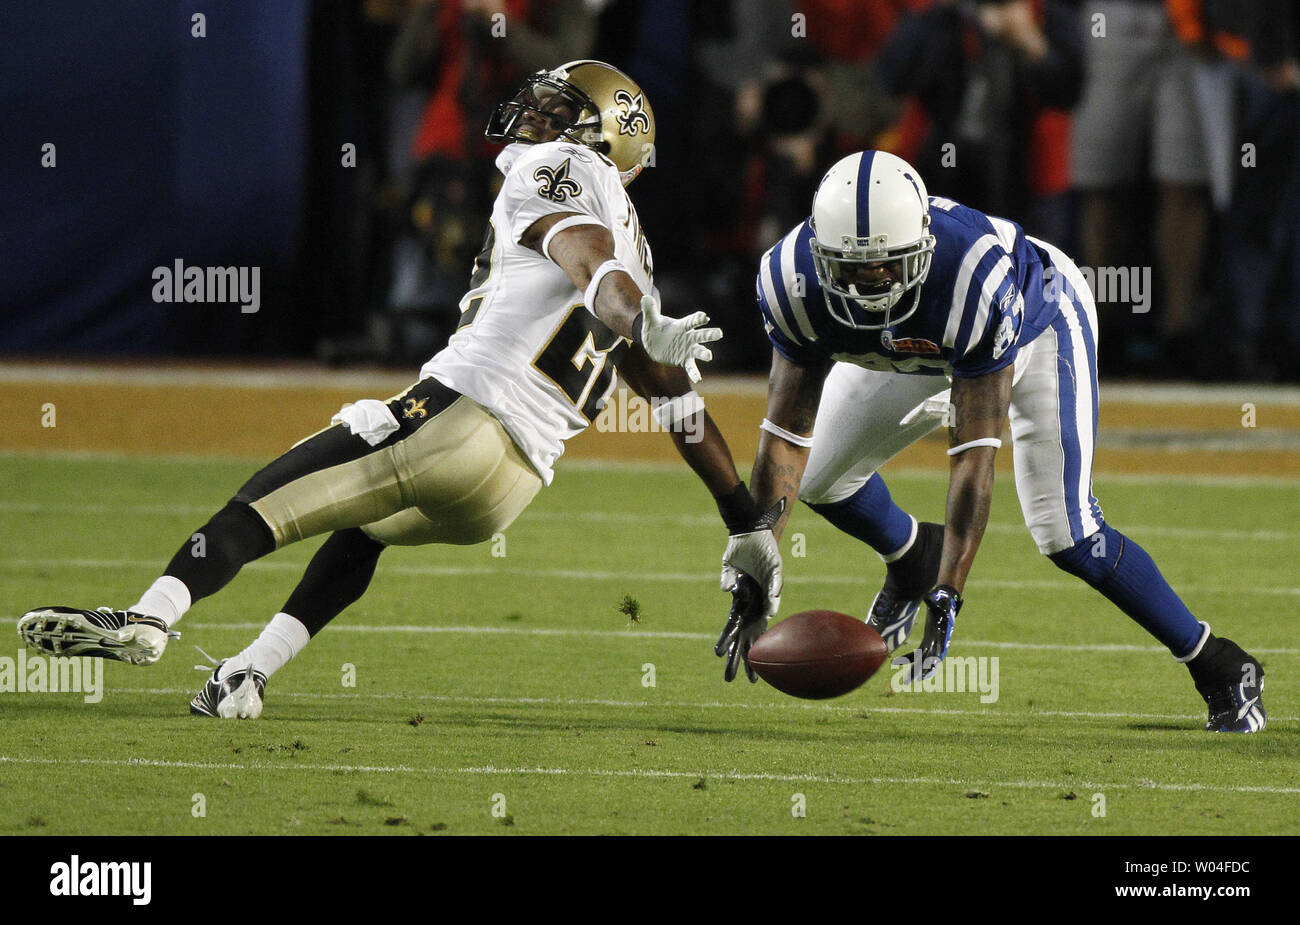 New Orleans Saints Tracy Porter (L) defends against Indianapolis Colts wide  receiver Reggie Wayne at Super Bowl XLIV in Miami on February 7, 2010.  UPI/Aaron M. Sprecher Stock Photo - Alamy